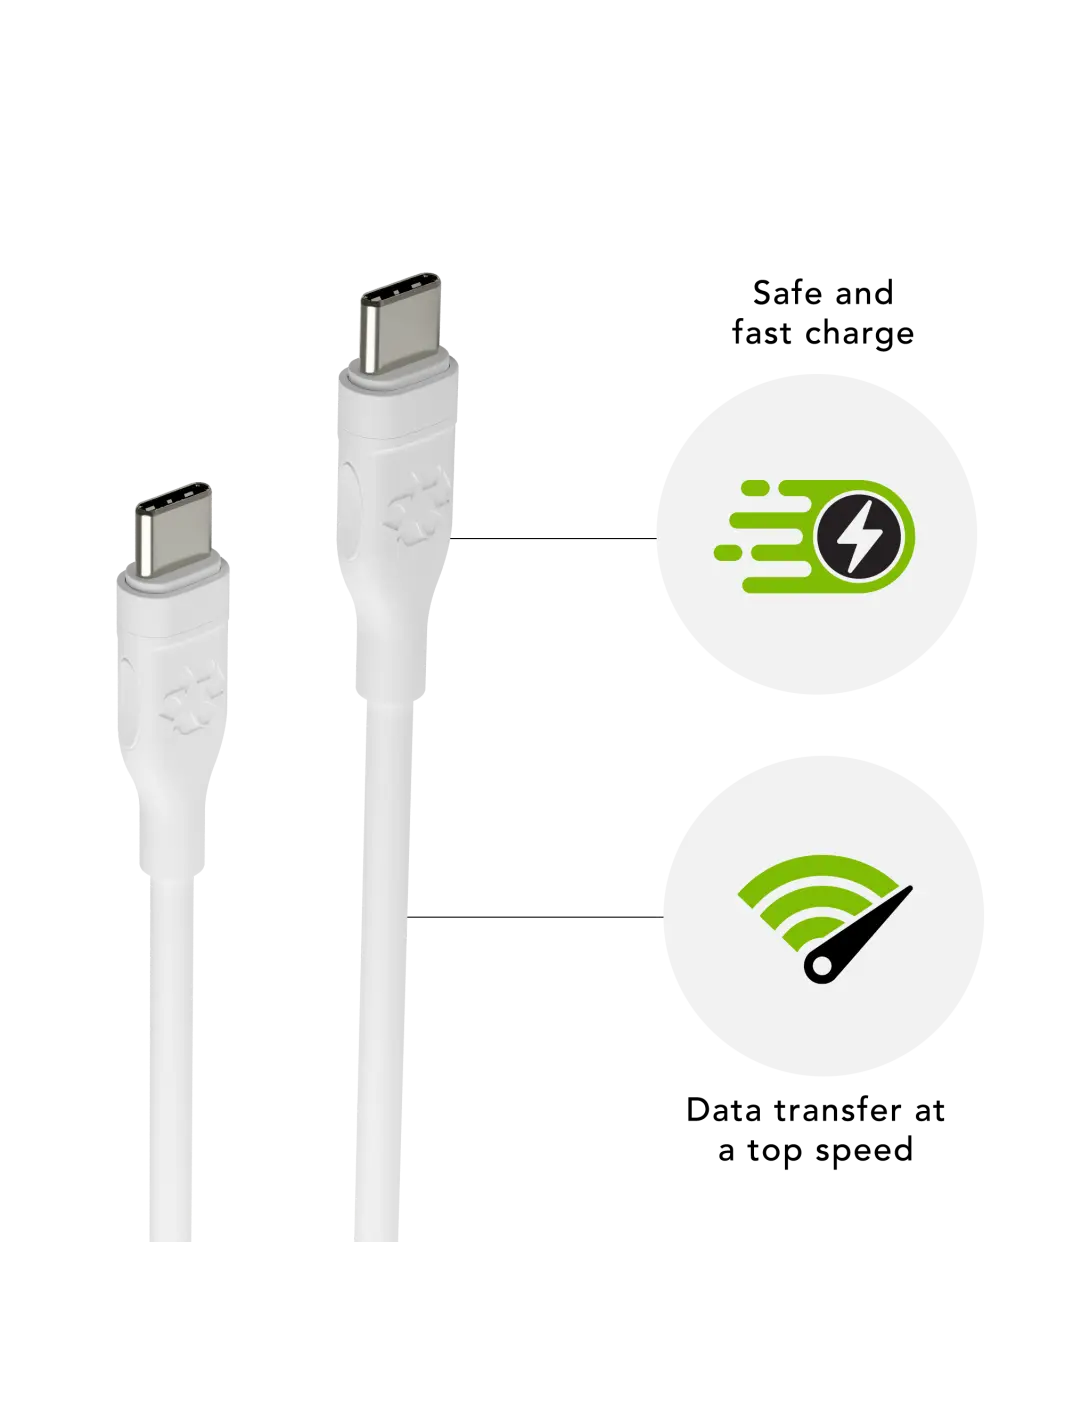 CABLES - STANDARD White USB-C to USB-C 1.2m Cables